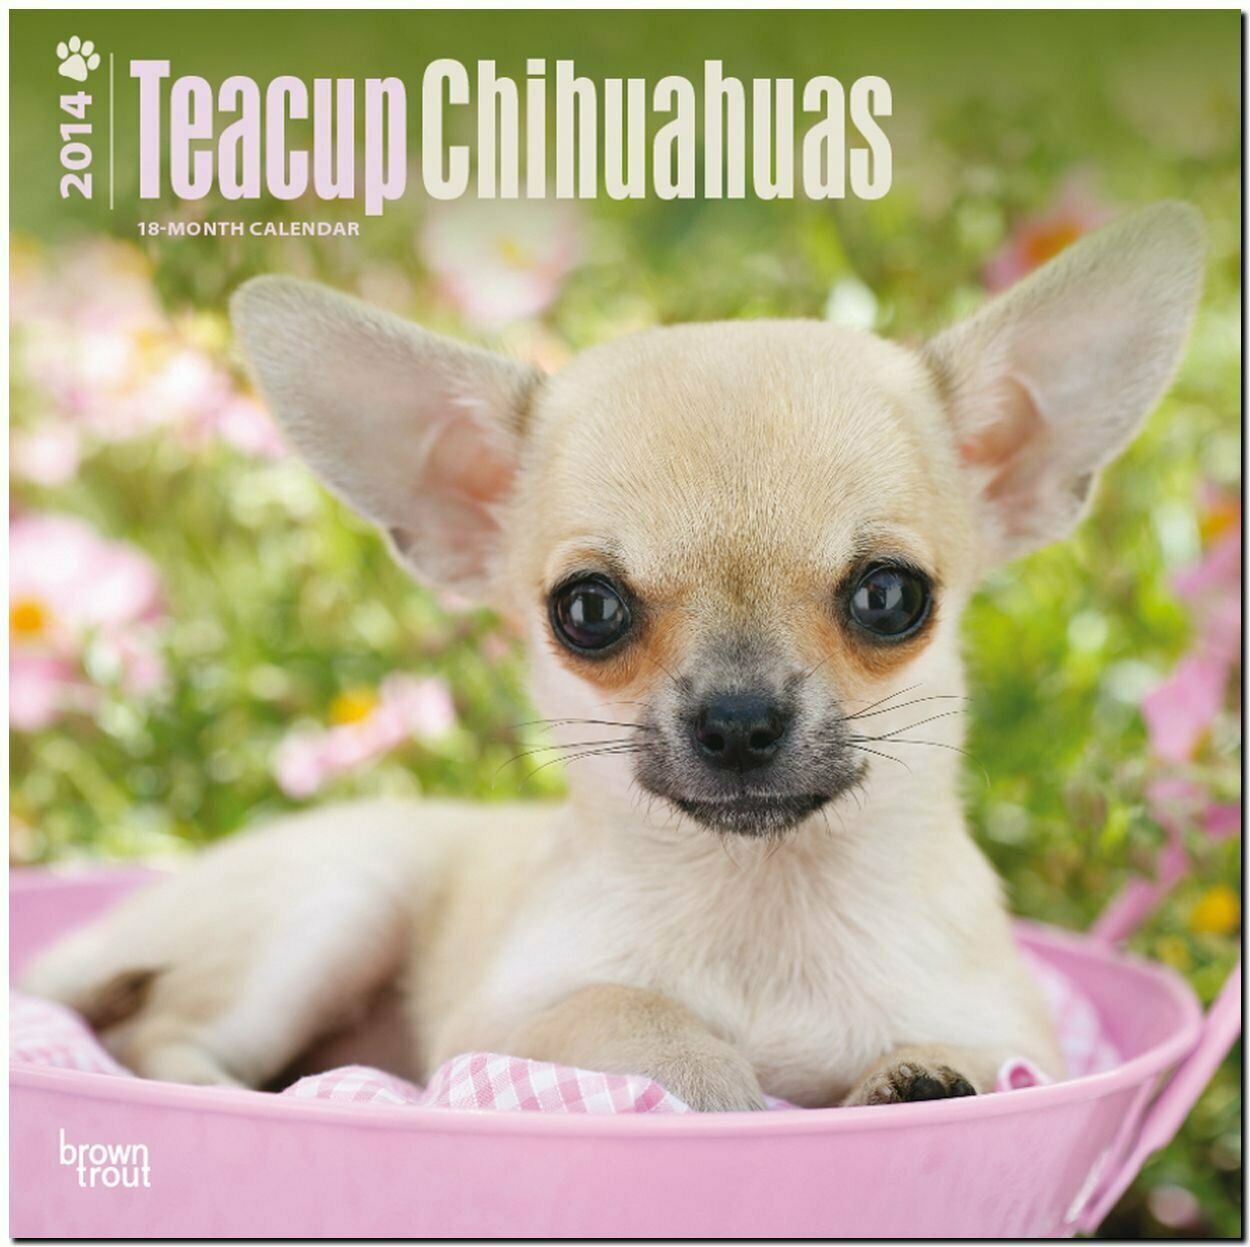 Primary image for Teacup Chihuahuas 2014 18-Month Calendar (Multilingual Edition)